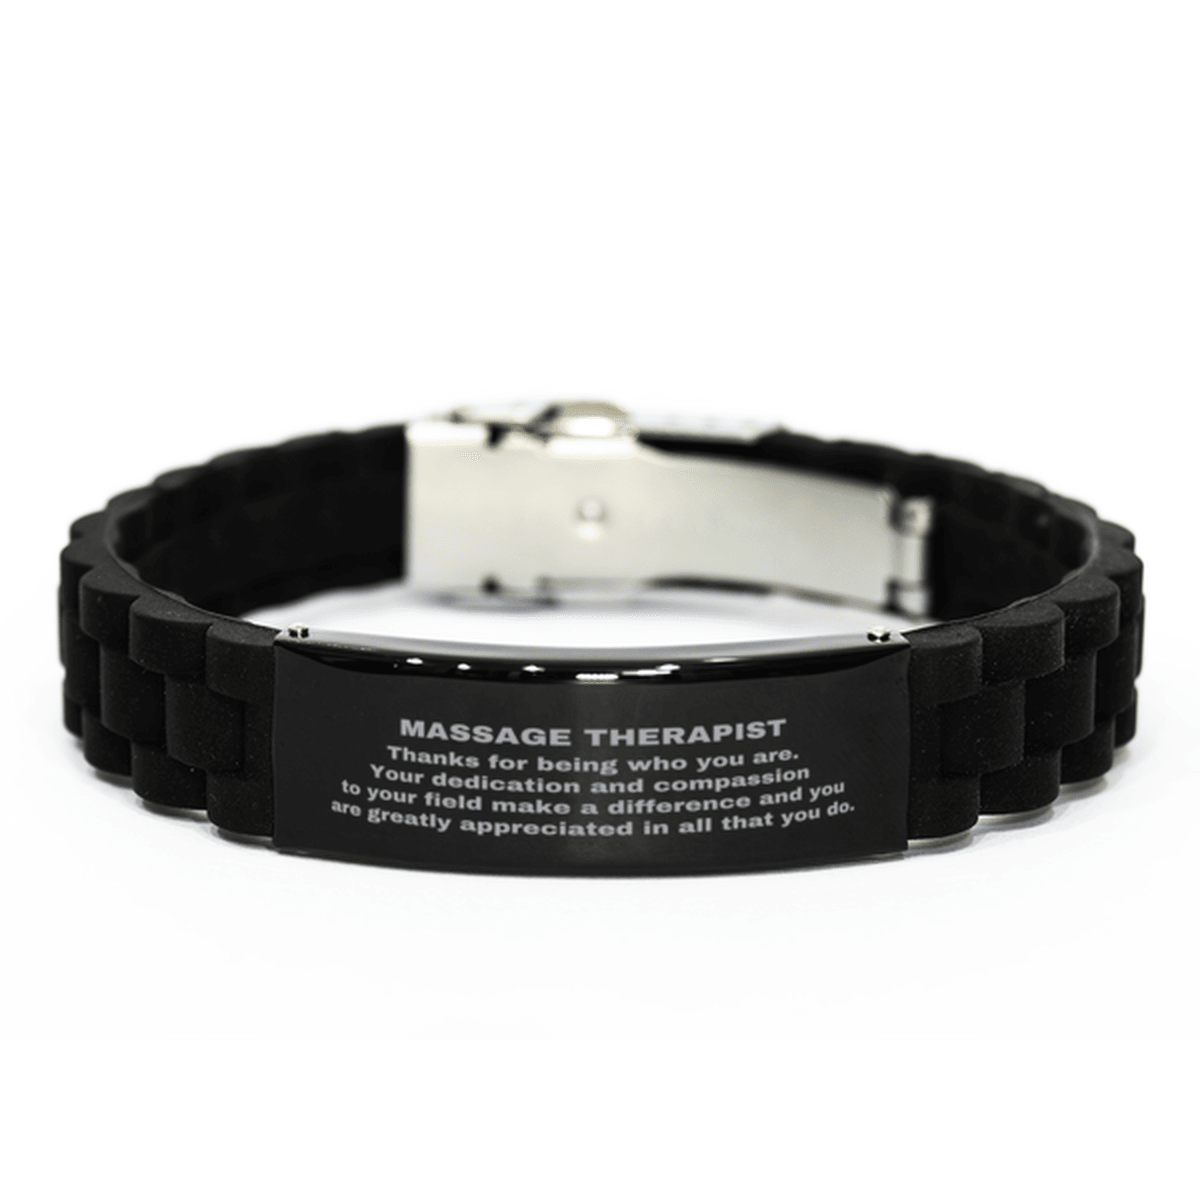 Massage Therapist Black Glidelock Clasp Engraved Bracelet - Thanks for being who you are - Birthday Christmas Jewelry Gifts Coworkers Colleague Boss